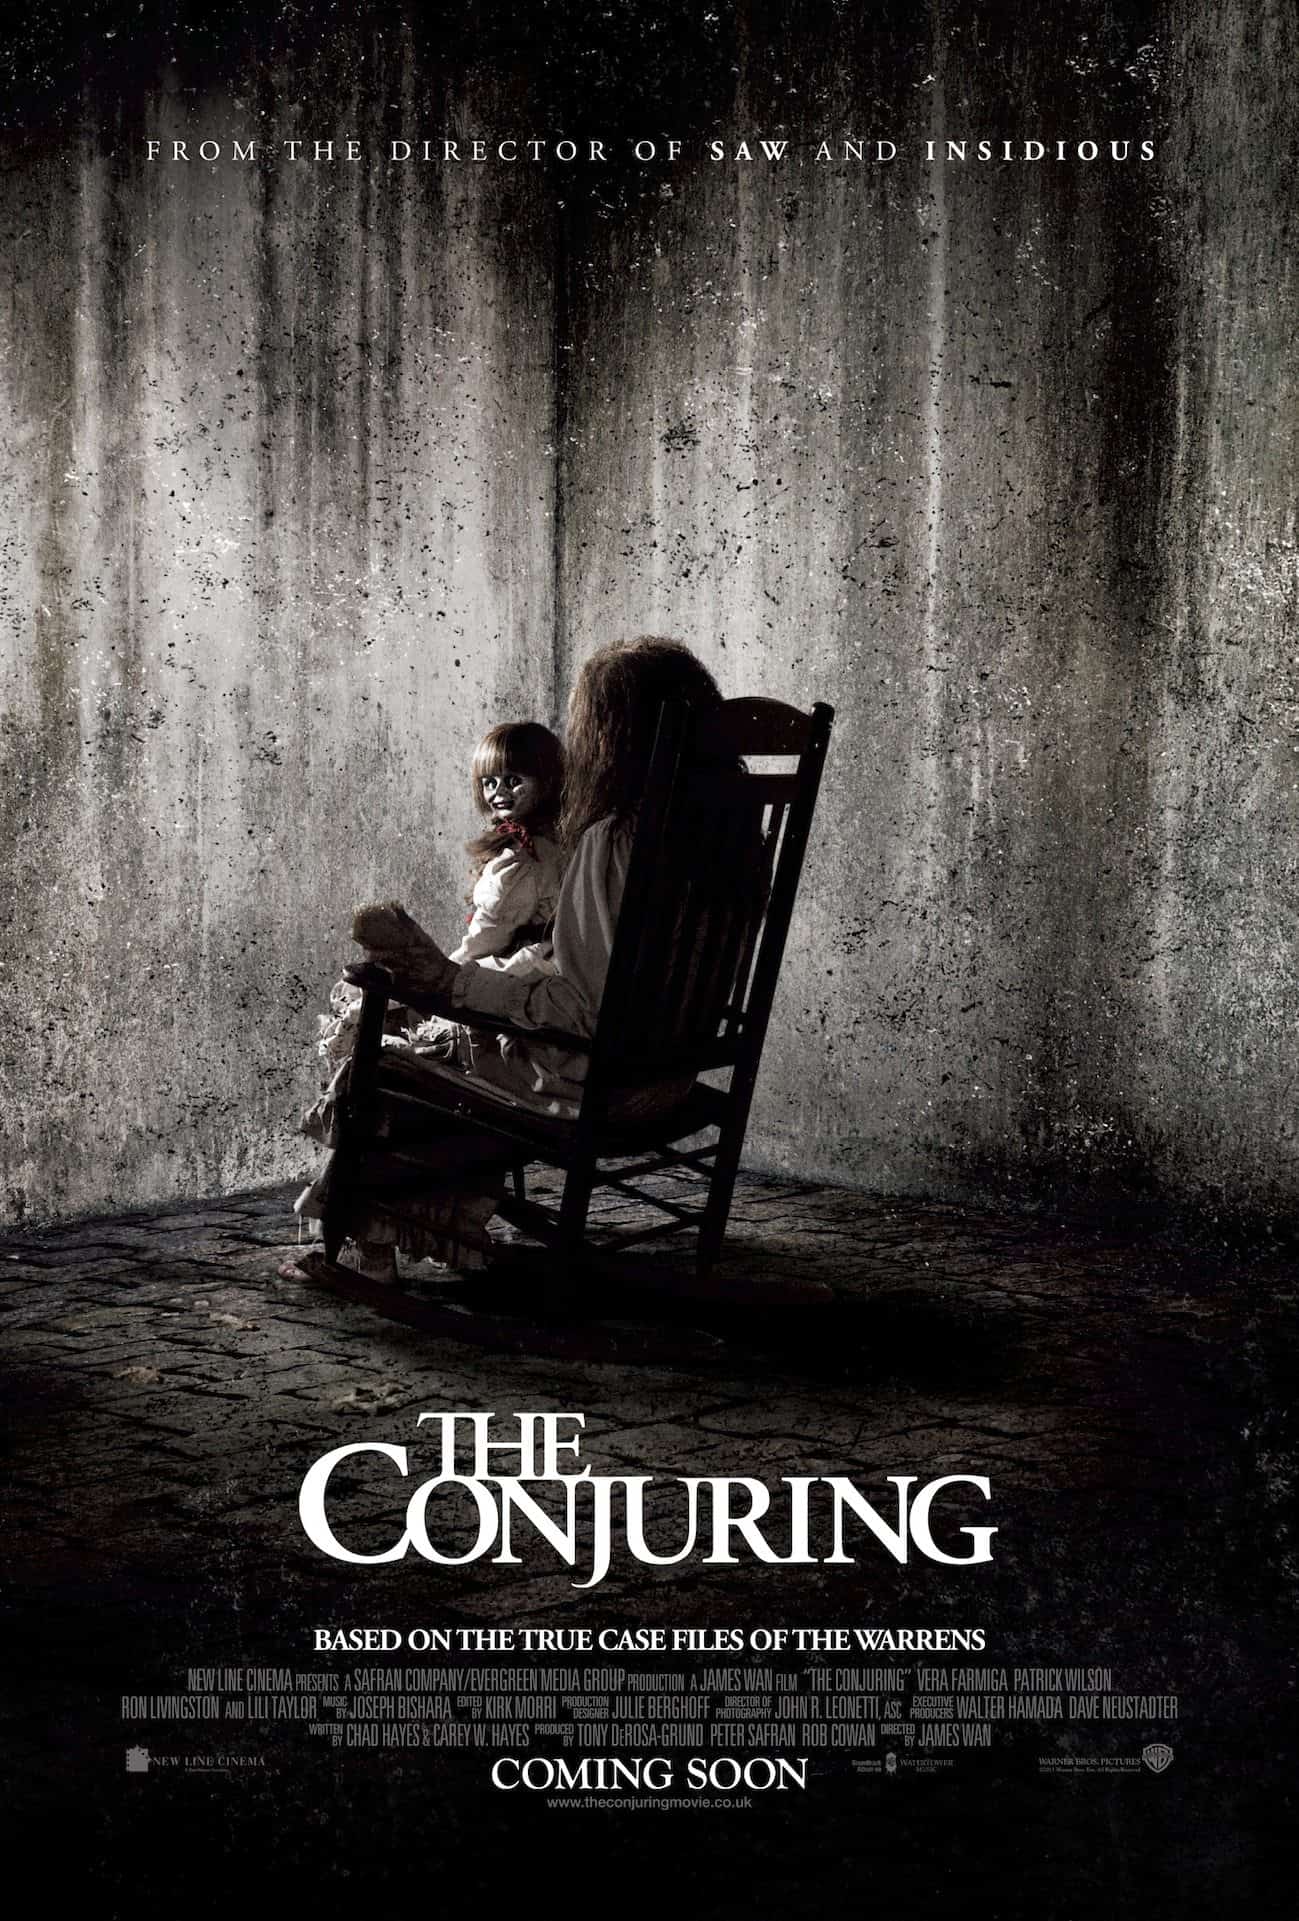 Horror Movie Review: The Conjuring (2013) - Games, Brrraaains & A  Head-Banging Life